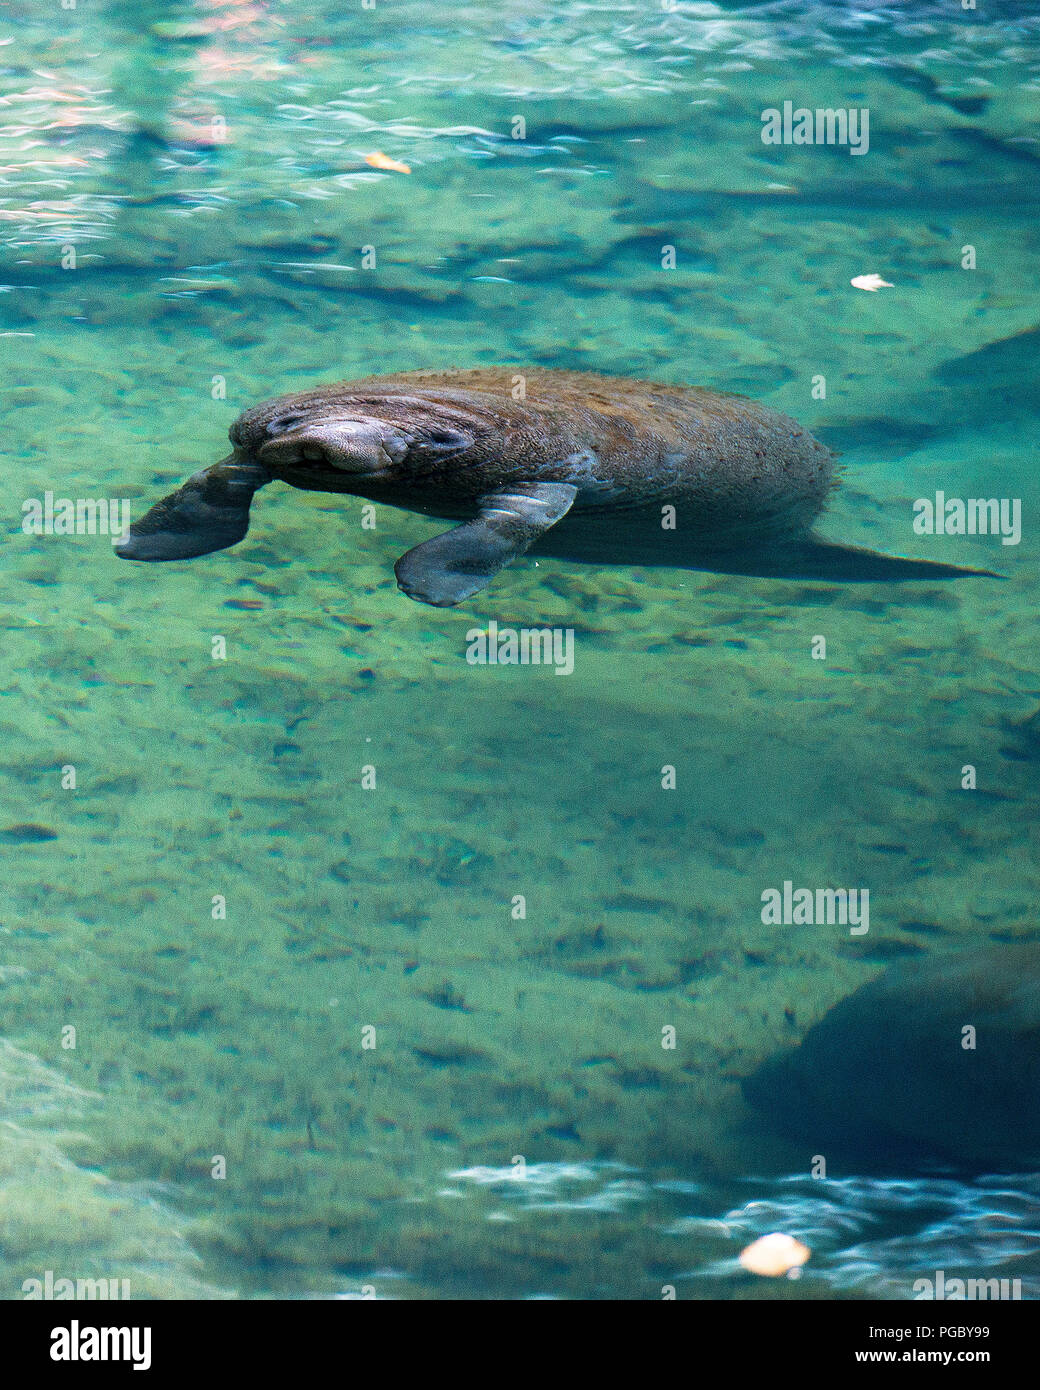 Manatee enjoying the warm outflow of water from Florida river. Stock Photo